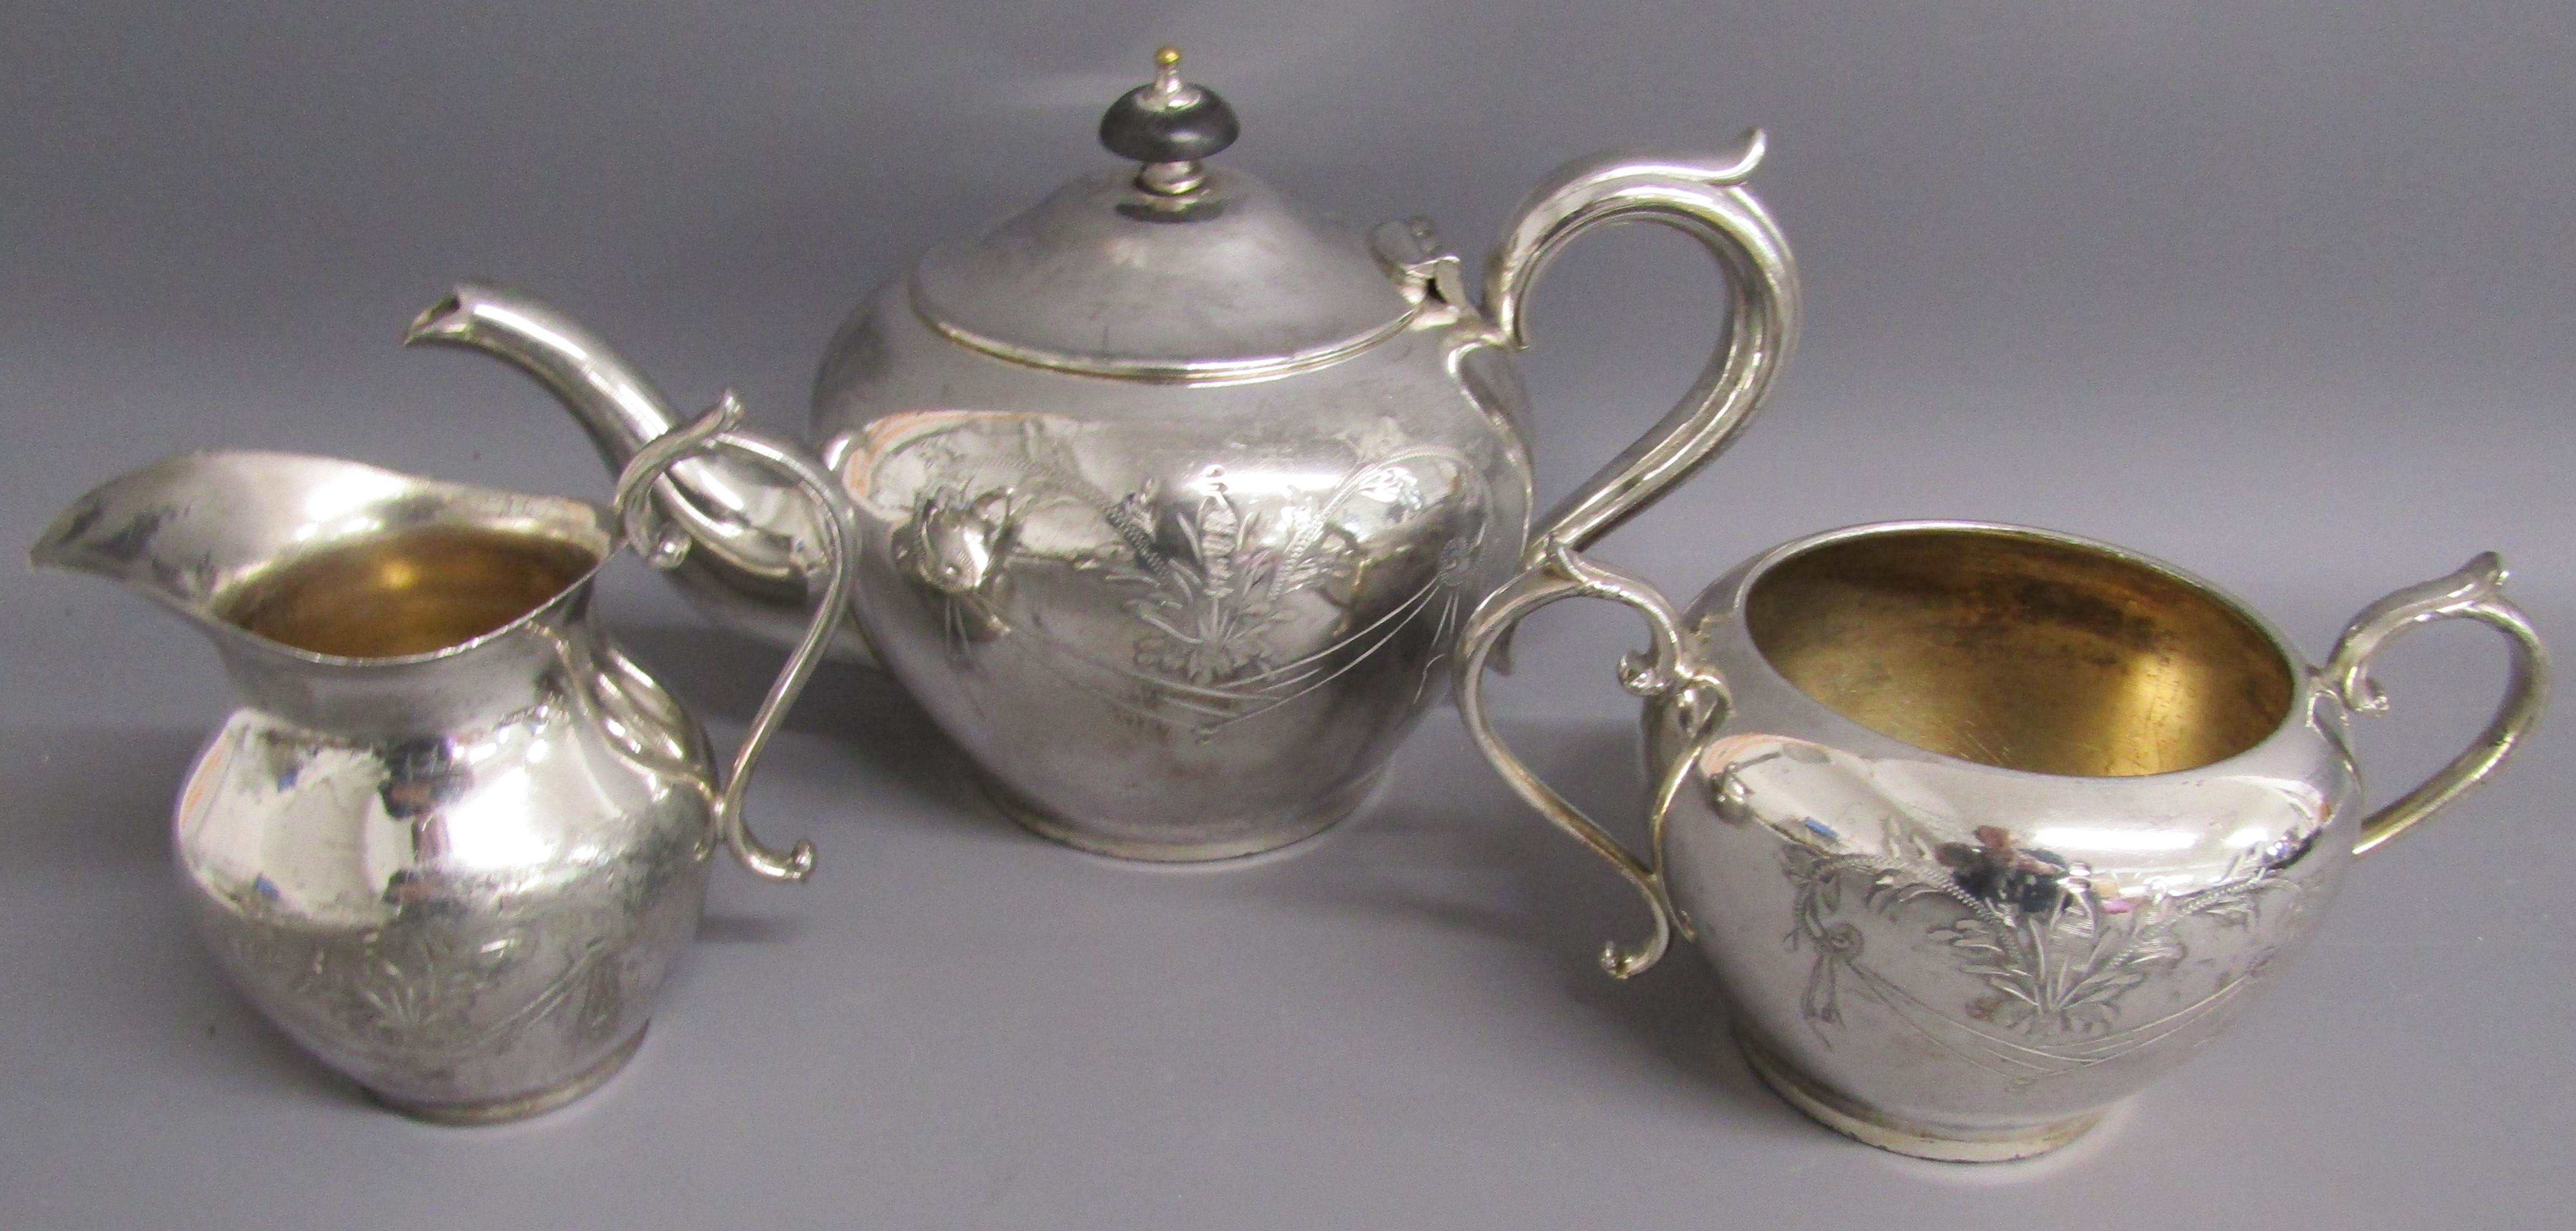 Silver plate includes 1907 wedding presentation hot water pot with ebonised handles, weighted - Image 9 of 11